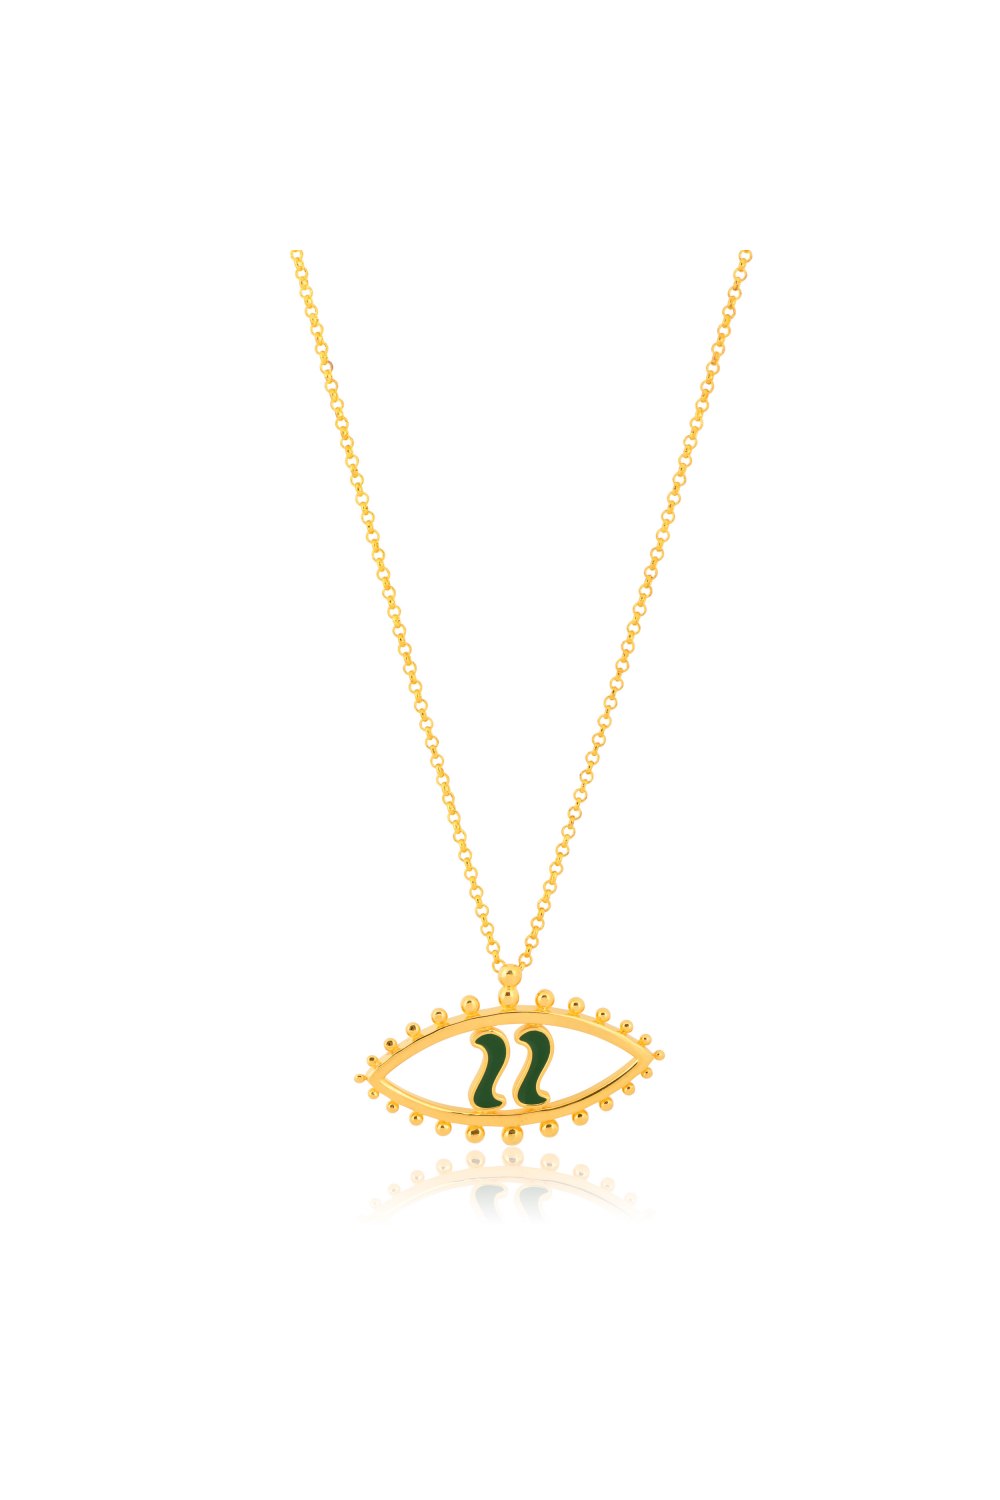 KESSARIS - Lucky Charm Evil Eye with Green 22 Necklace Gold Plated